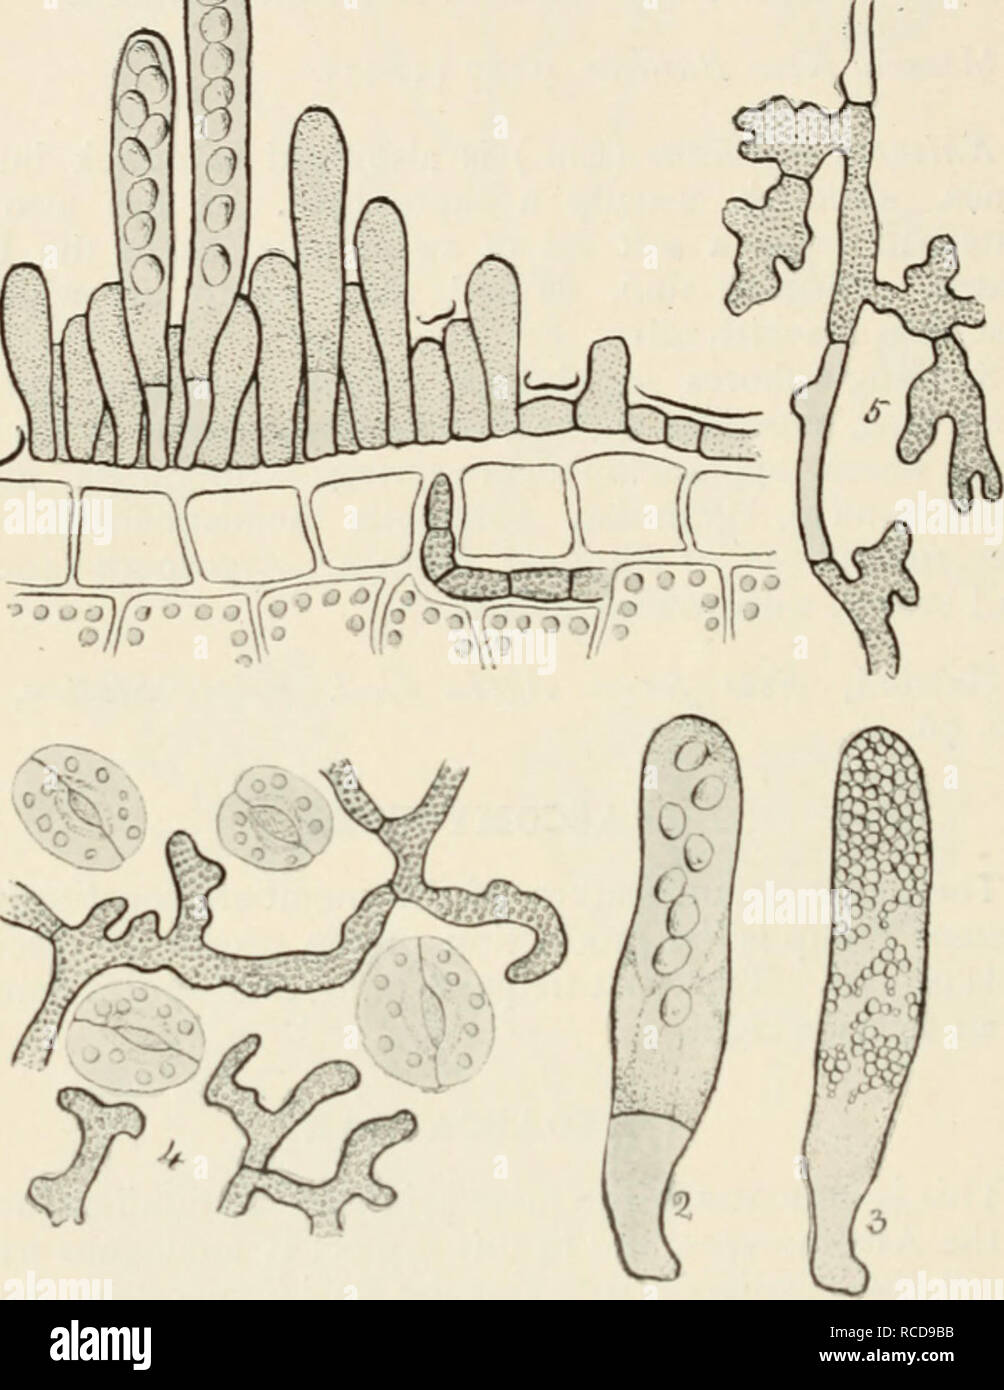 . Diseases of cultivated plants and trees. Plant diseases; Plants -- Wounds and injuries; Plants, Protection of; Trees -- Diseases and pests. Fig. 31. I, lixoascus deformans, sliowing asci in various stages of development burslinR through the cuticle of the leaf; 2, ascus of Exoanus pruni, showing stalk-cell at base of ascus, and eight spores; 3, ascus of Taphritia aiirca filled with secondary spores produced by budding of the ascospores ; 4, surface view of niycelium of Taphrina Sadcbcckii on leaf of Almes glutinosa ; 5, differentiation of fertile or ascogenous hyphae from vegetative hyphae o Stock Photo